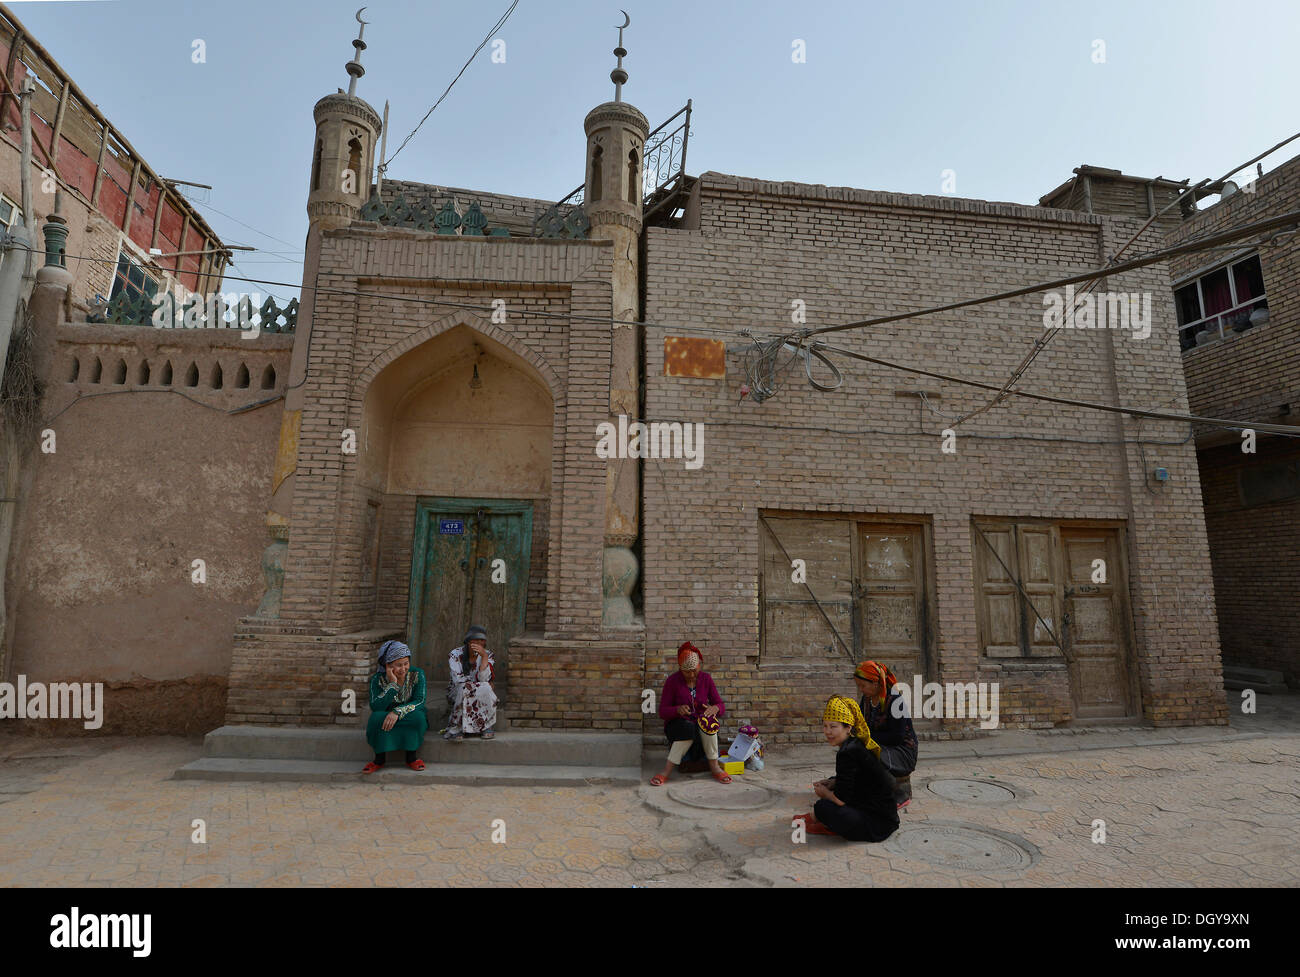 Muslim women, Uighurs with colourful headscarves sitting in front of a mosque, mud-brick houses, Uighur historic centre of Stock Photo